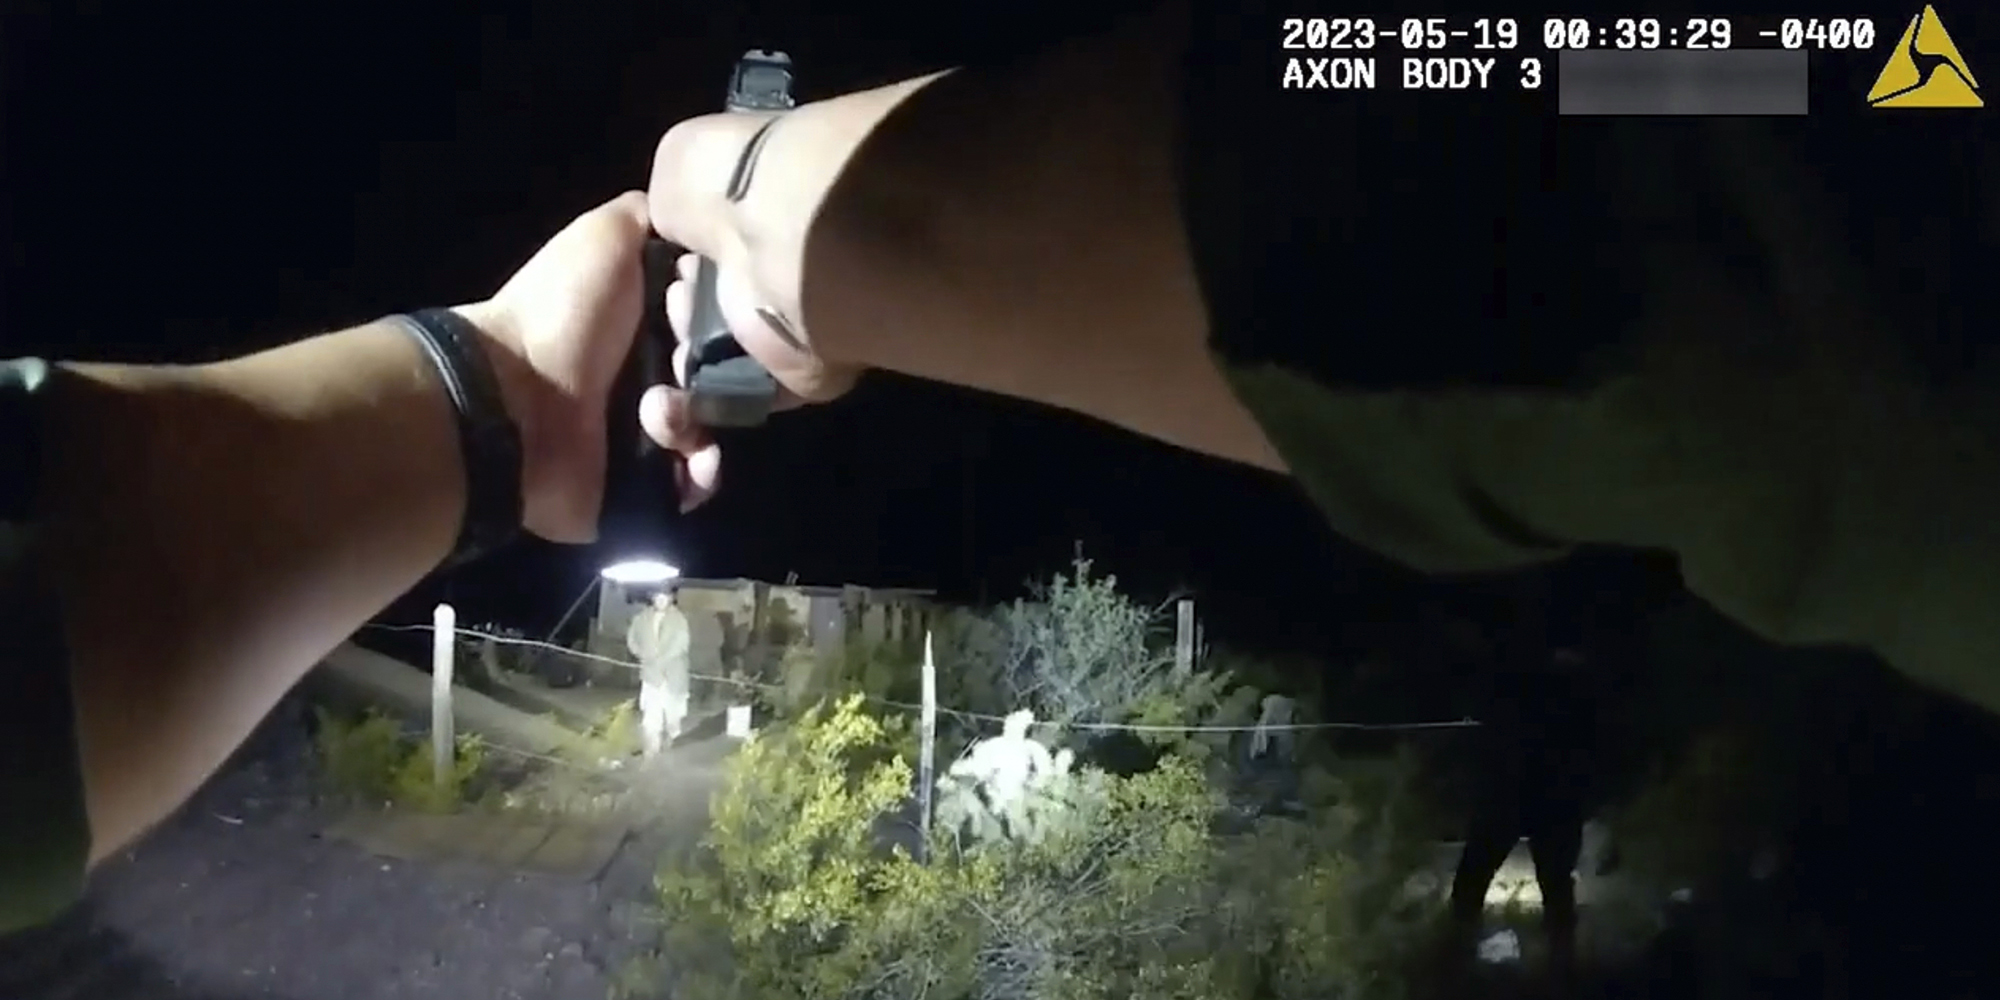 In this image taken from body camera video released Thursday, June 22, 2023, by U.S. Customs and Border Protection, an agent points a gun at tribal member Raymond Mattia, early Friday, May 19, in Tohono O'odham Nation, in southern Arizona.